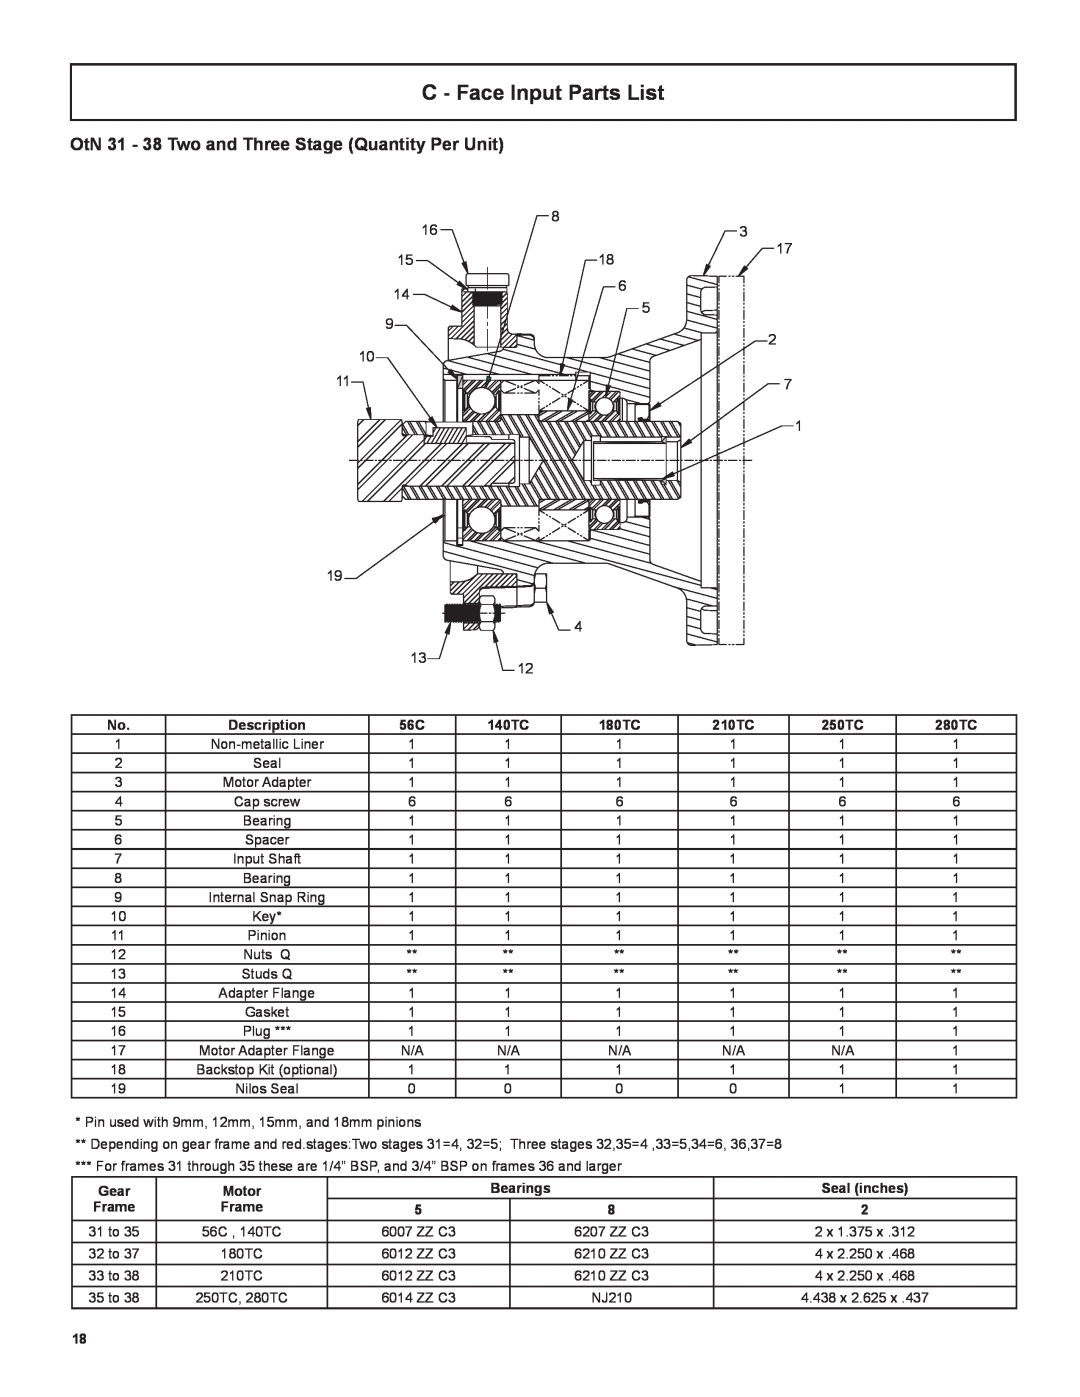 Emerson 3000 C - Face Input Parts List, OtN 31 - 38 Two and Three Stage Quantity Per Unit, Gear, Motor, Bearings, Frame 